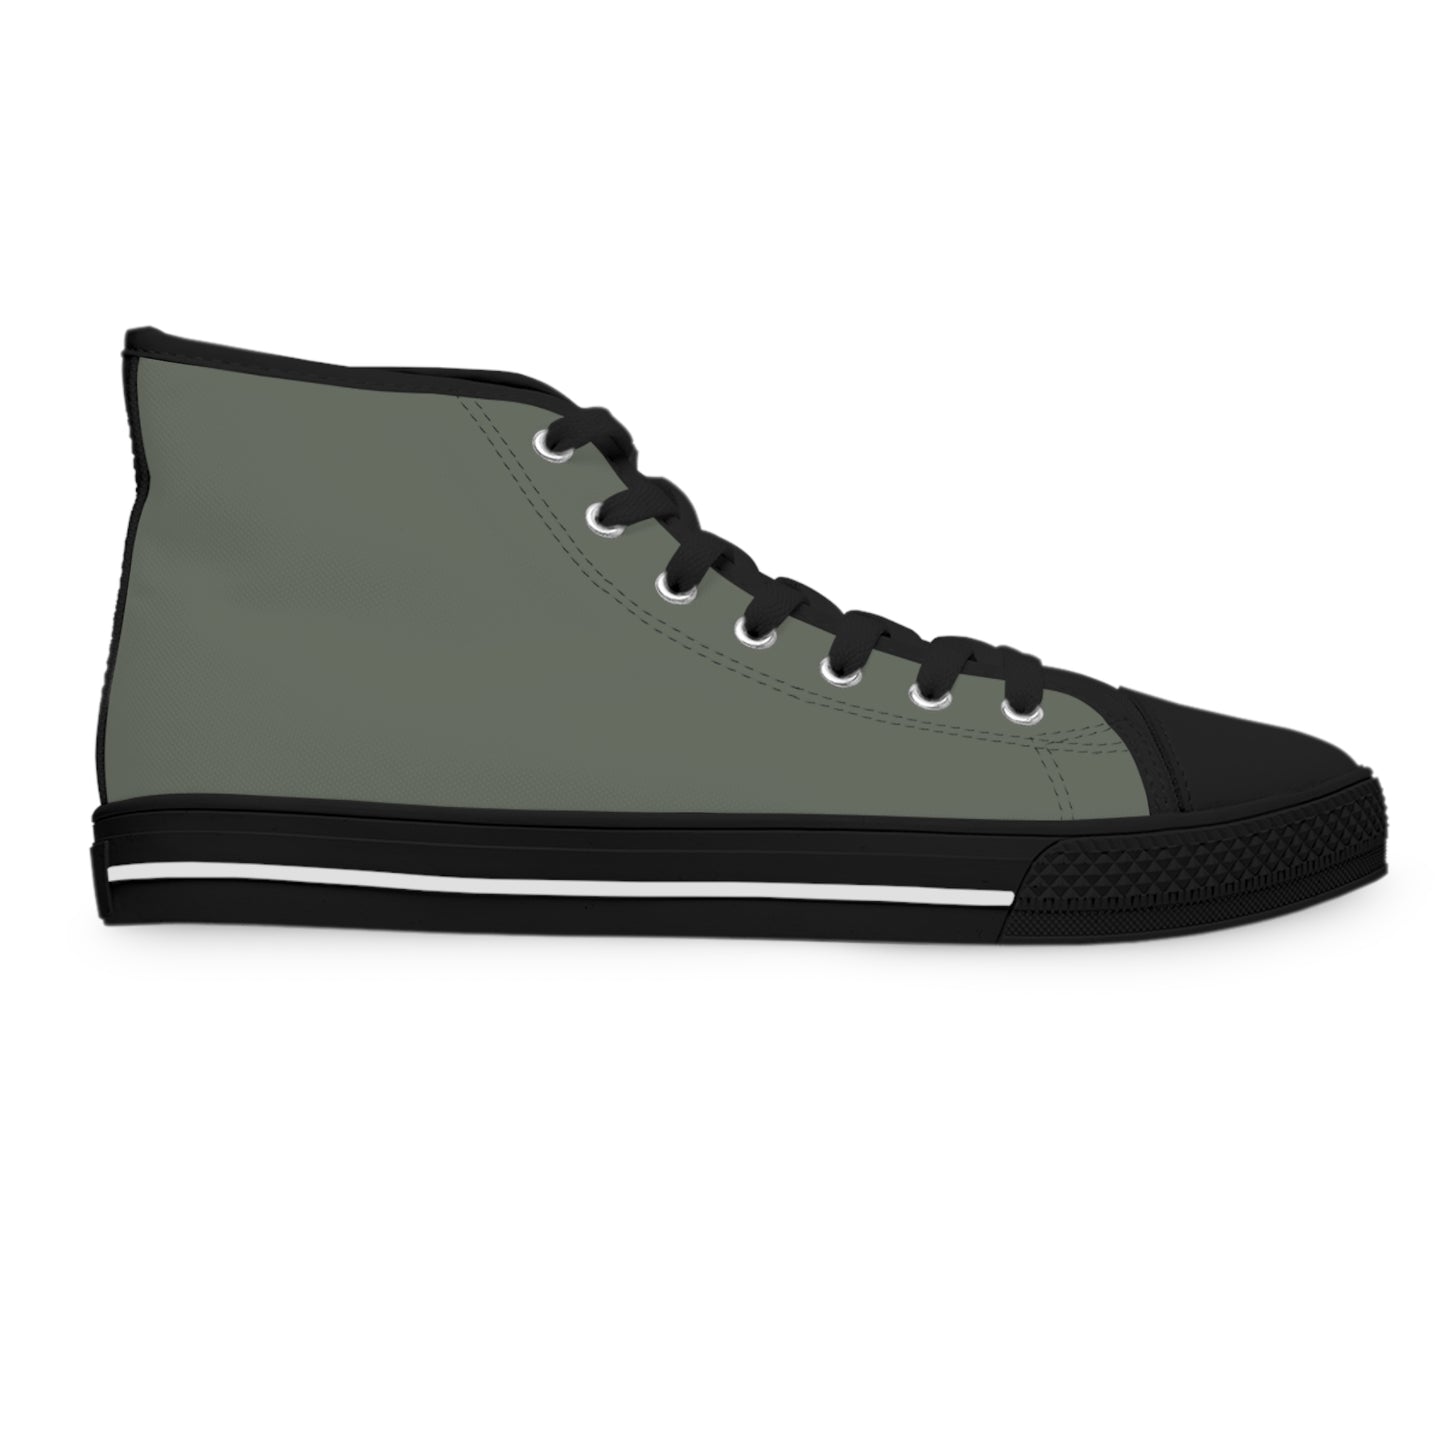 Women's Canvas High Top Solid Color Sneakers - Drab Olive Gray US 12 White sole